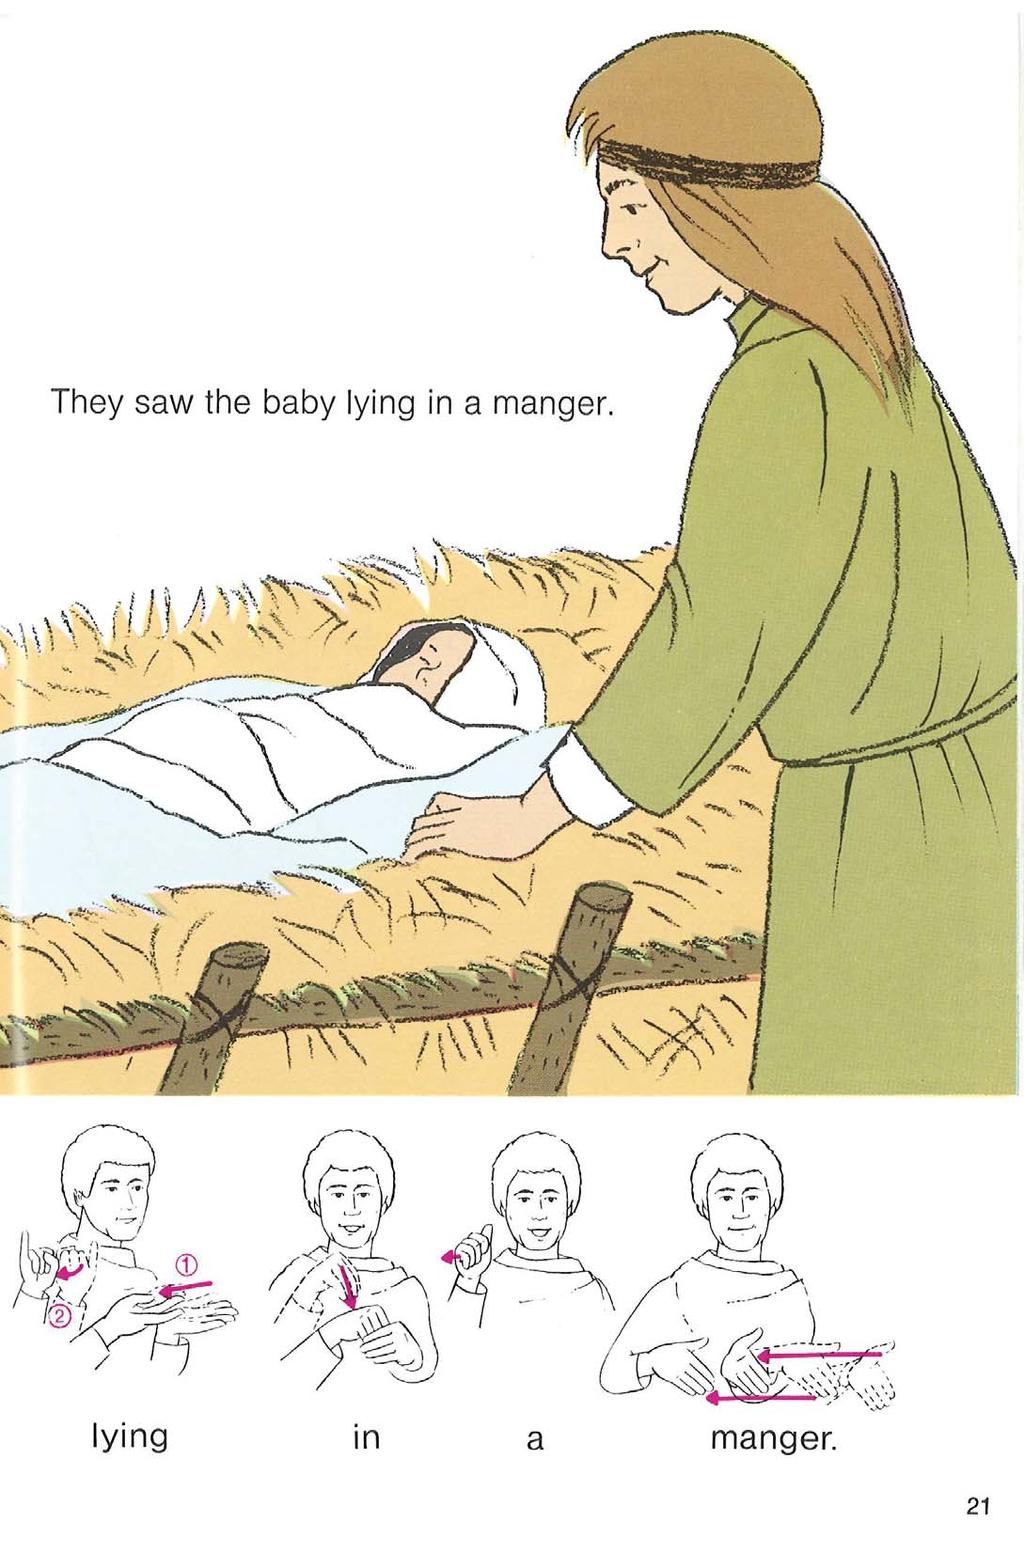 They saw the baby lying in a